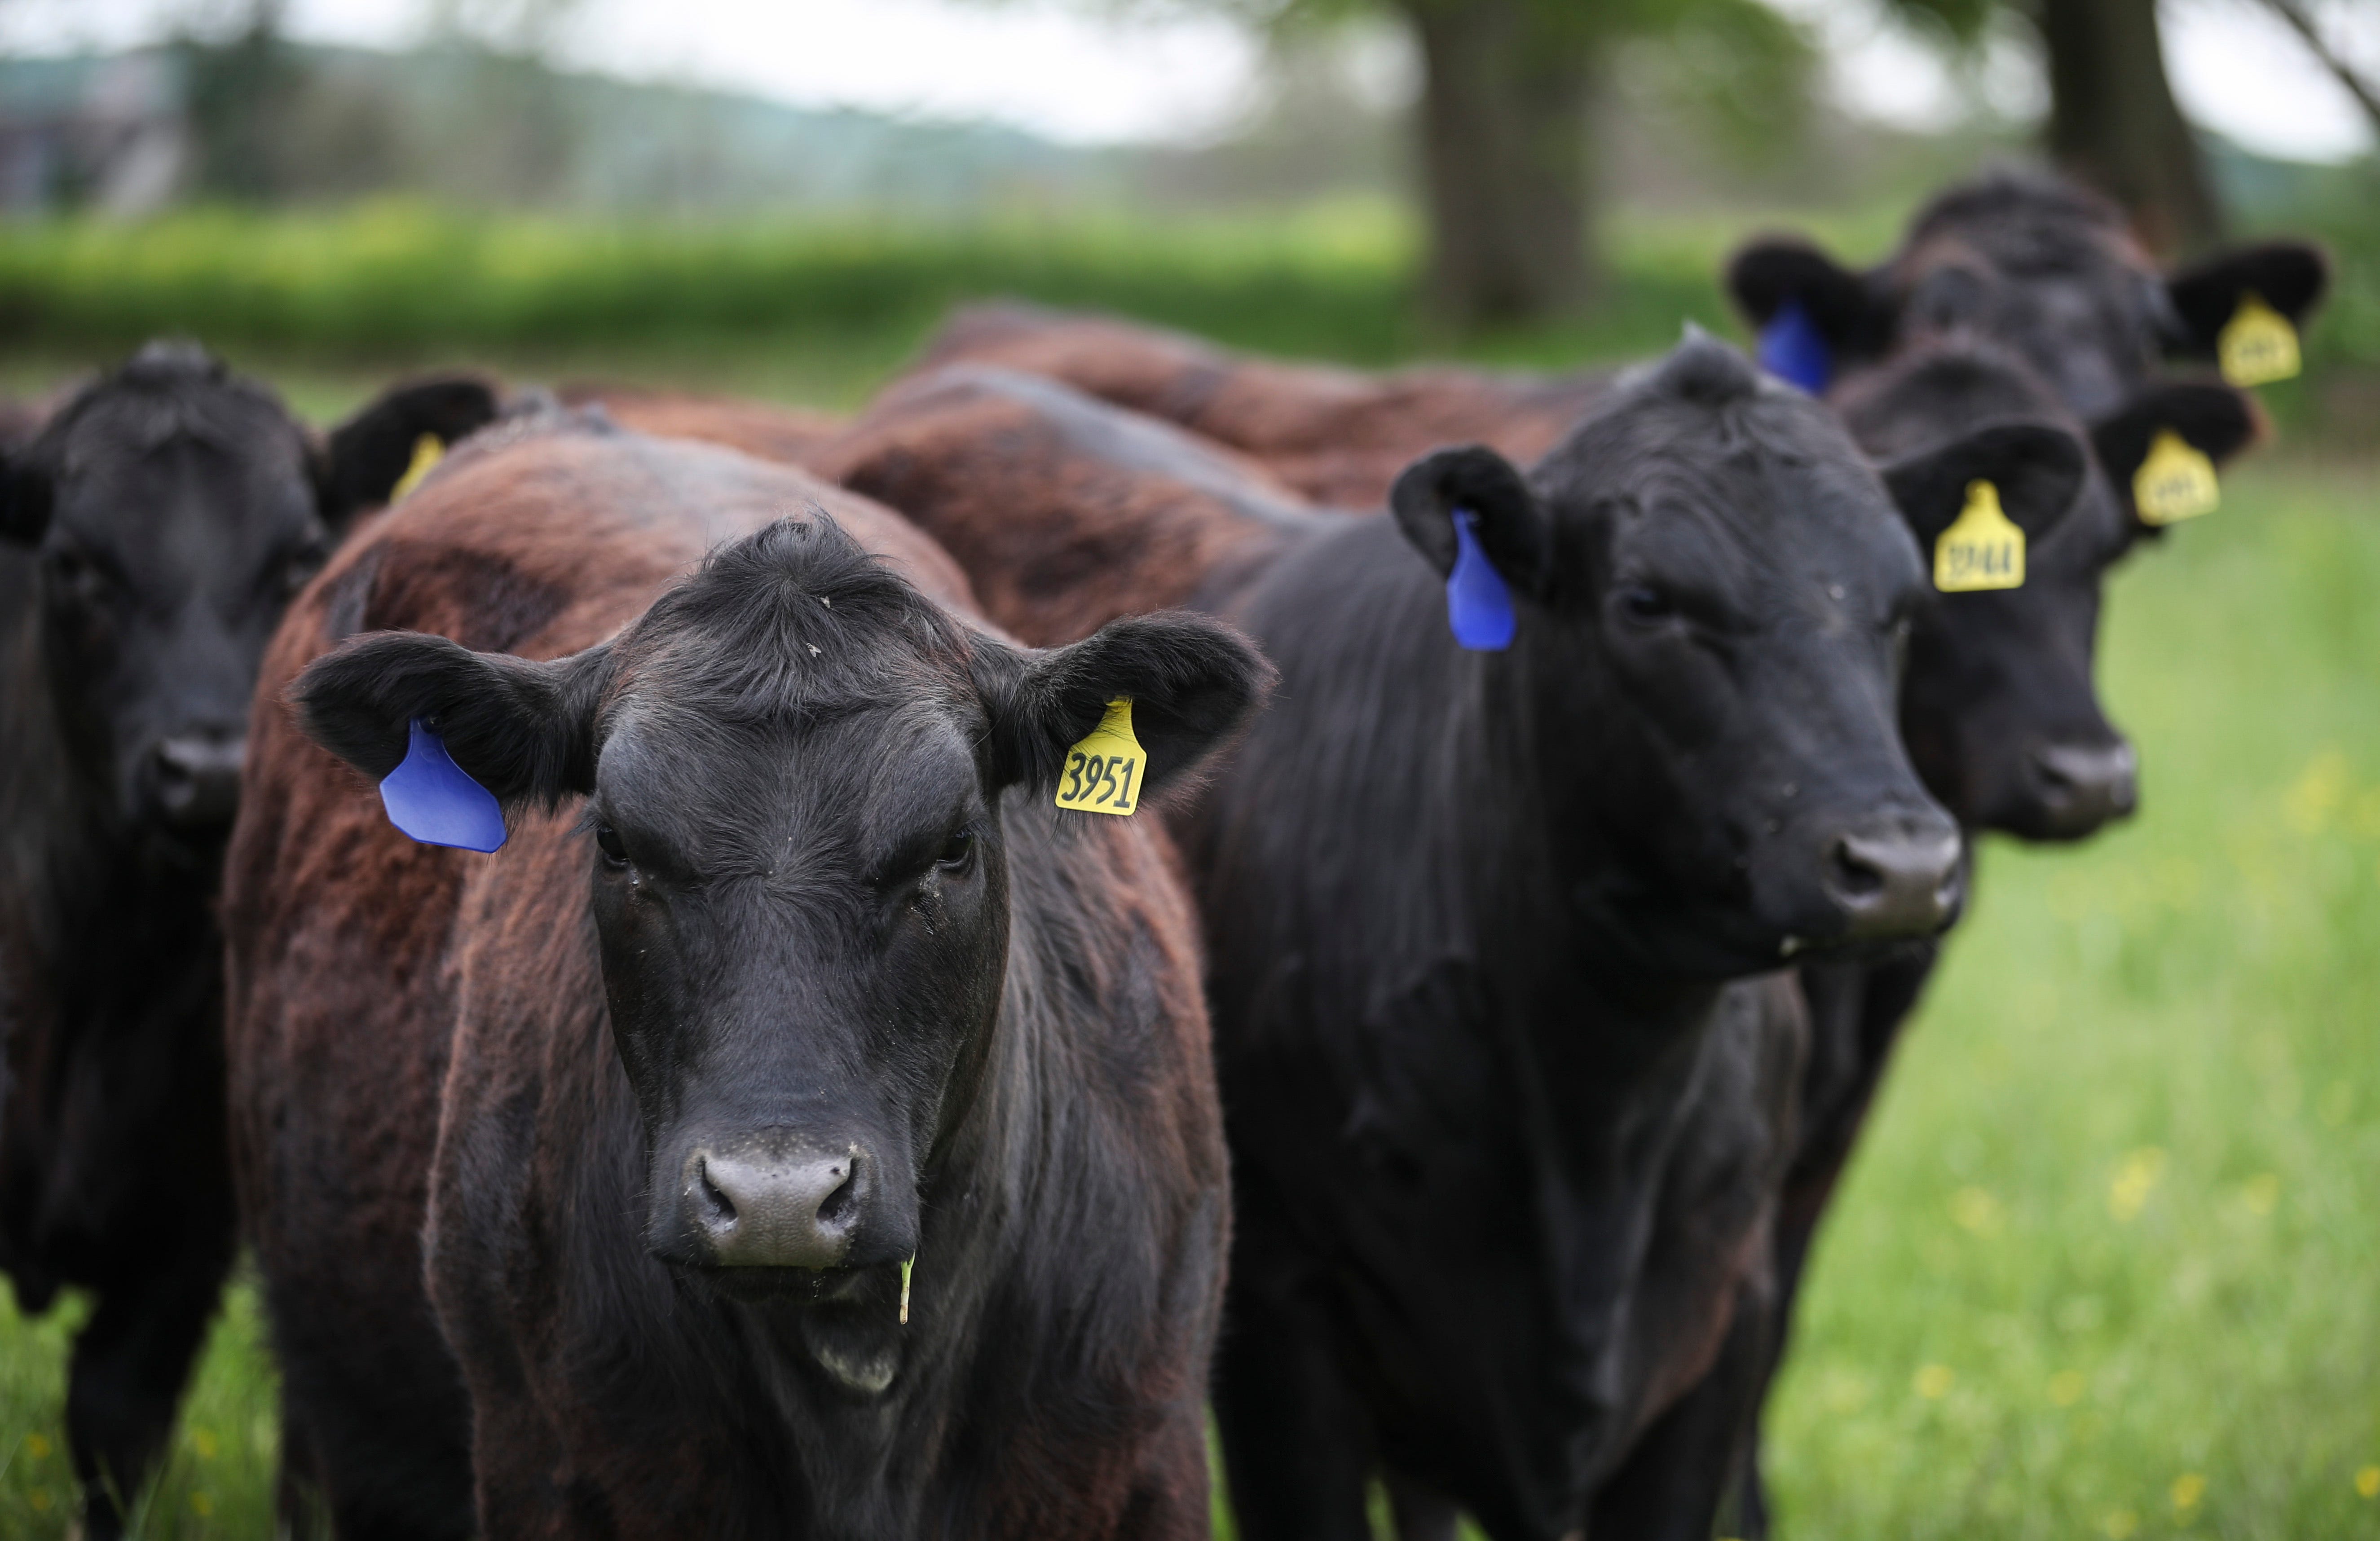 The Oak Hollow Angus cattle farm in Smiths Grove, Ky., breeds around 400 angus cows a year. They sell around 100 females and sell 100 bulls to other farms. The eighth-generation family farm also sells beef for the Kentucky Cattlemen's Ground Beef, which is sold at Kroger.